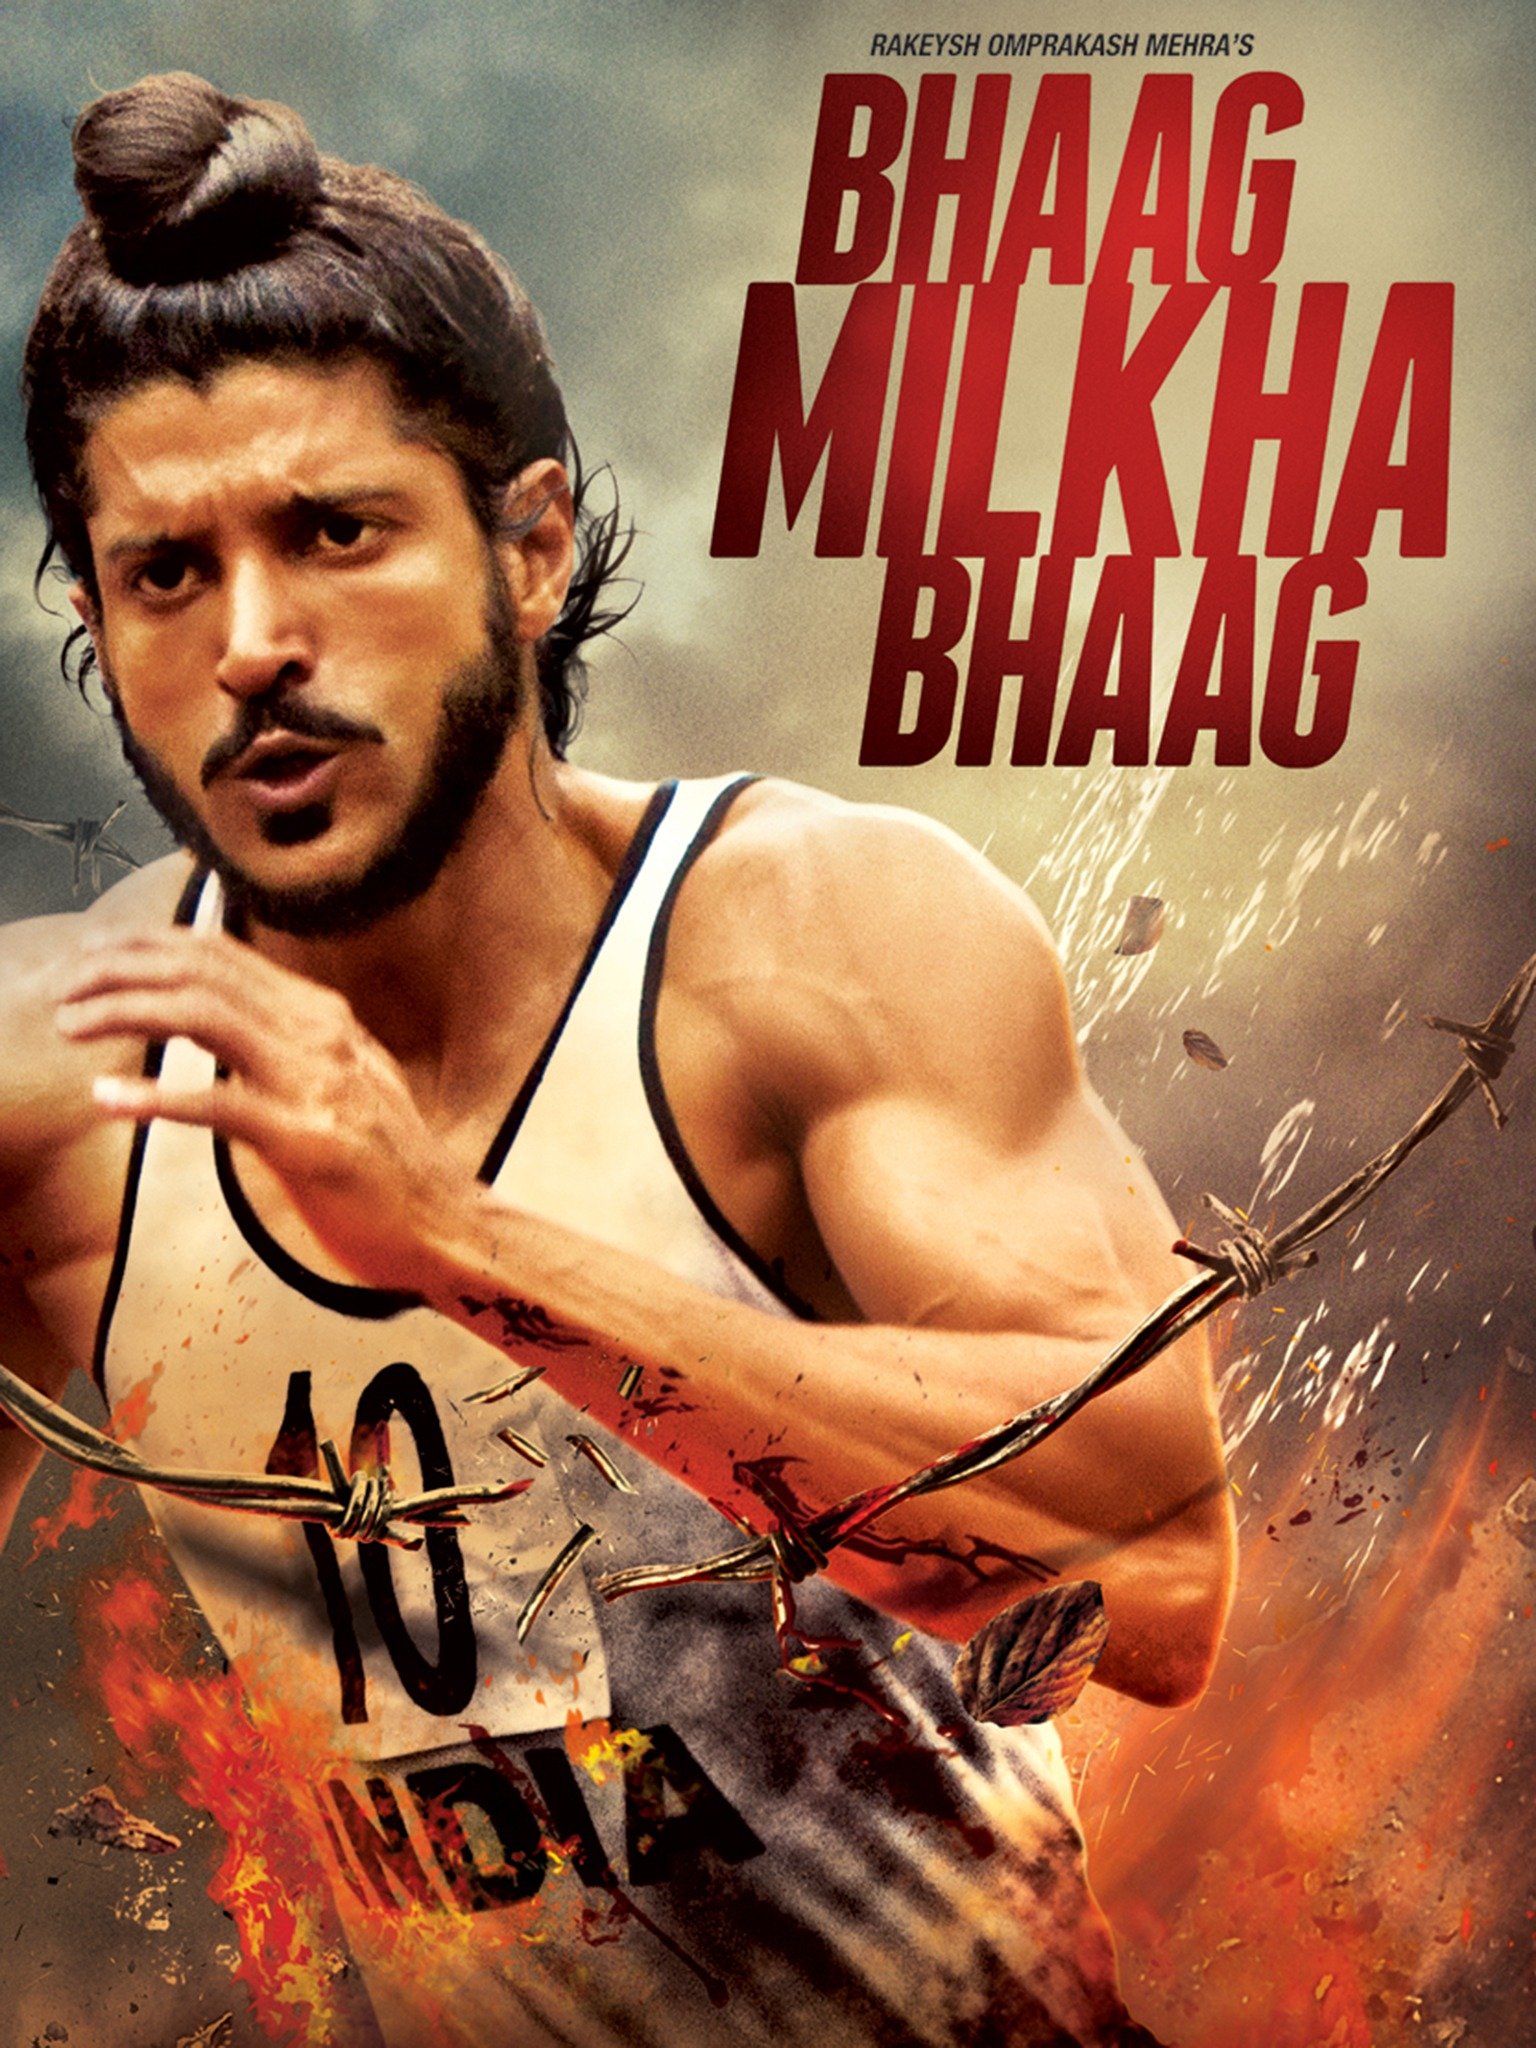 Milkha Singh Images Hd Full Download - Colaboratory